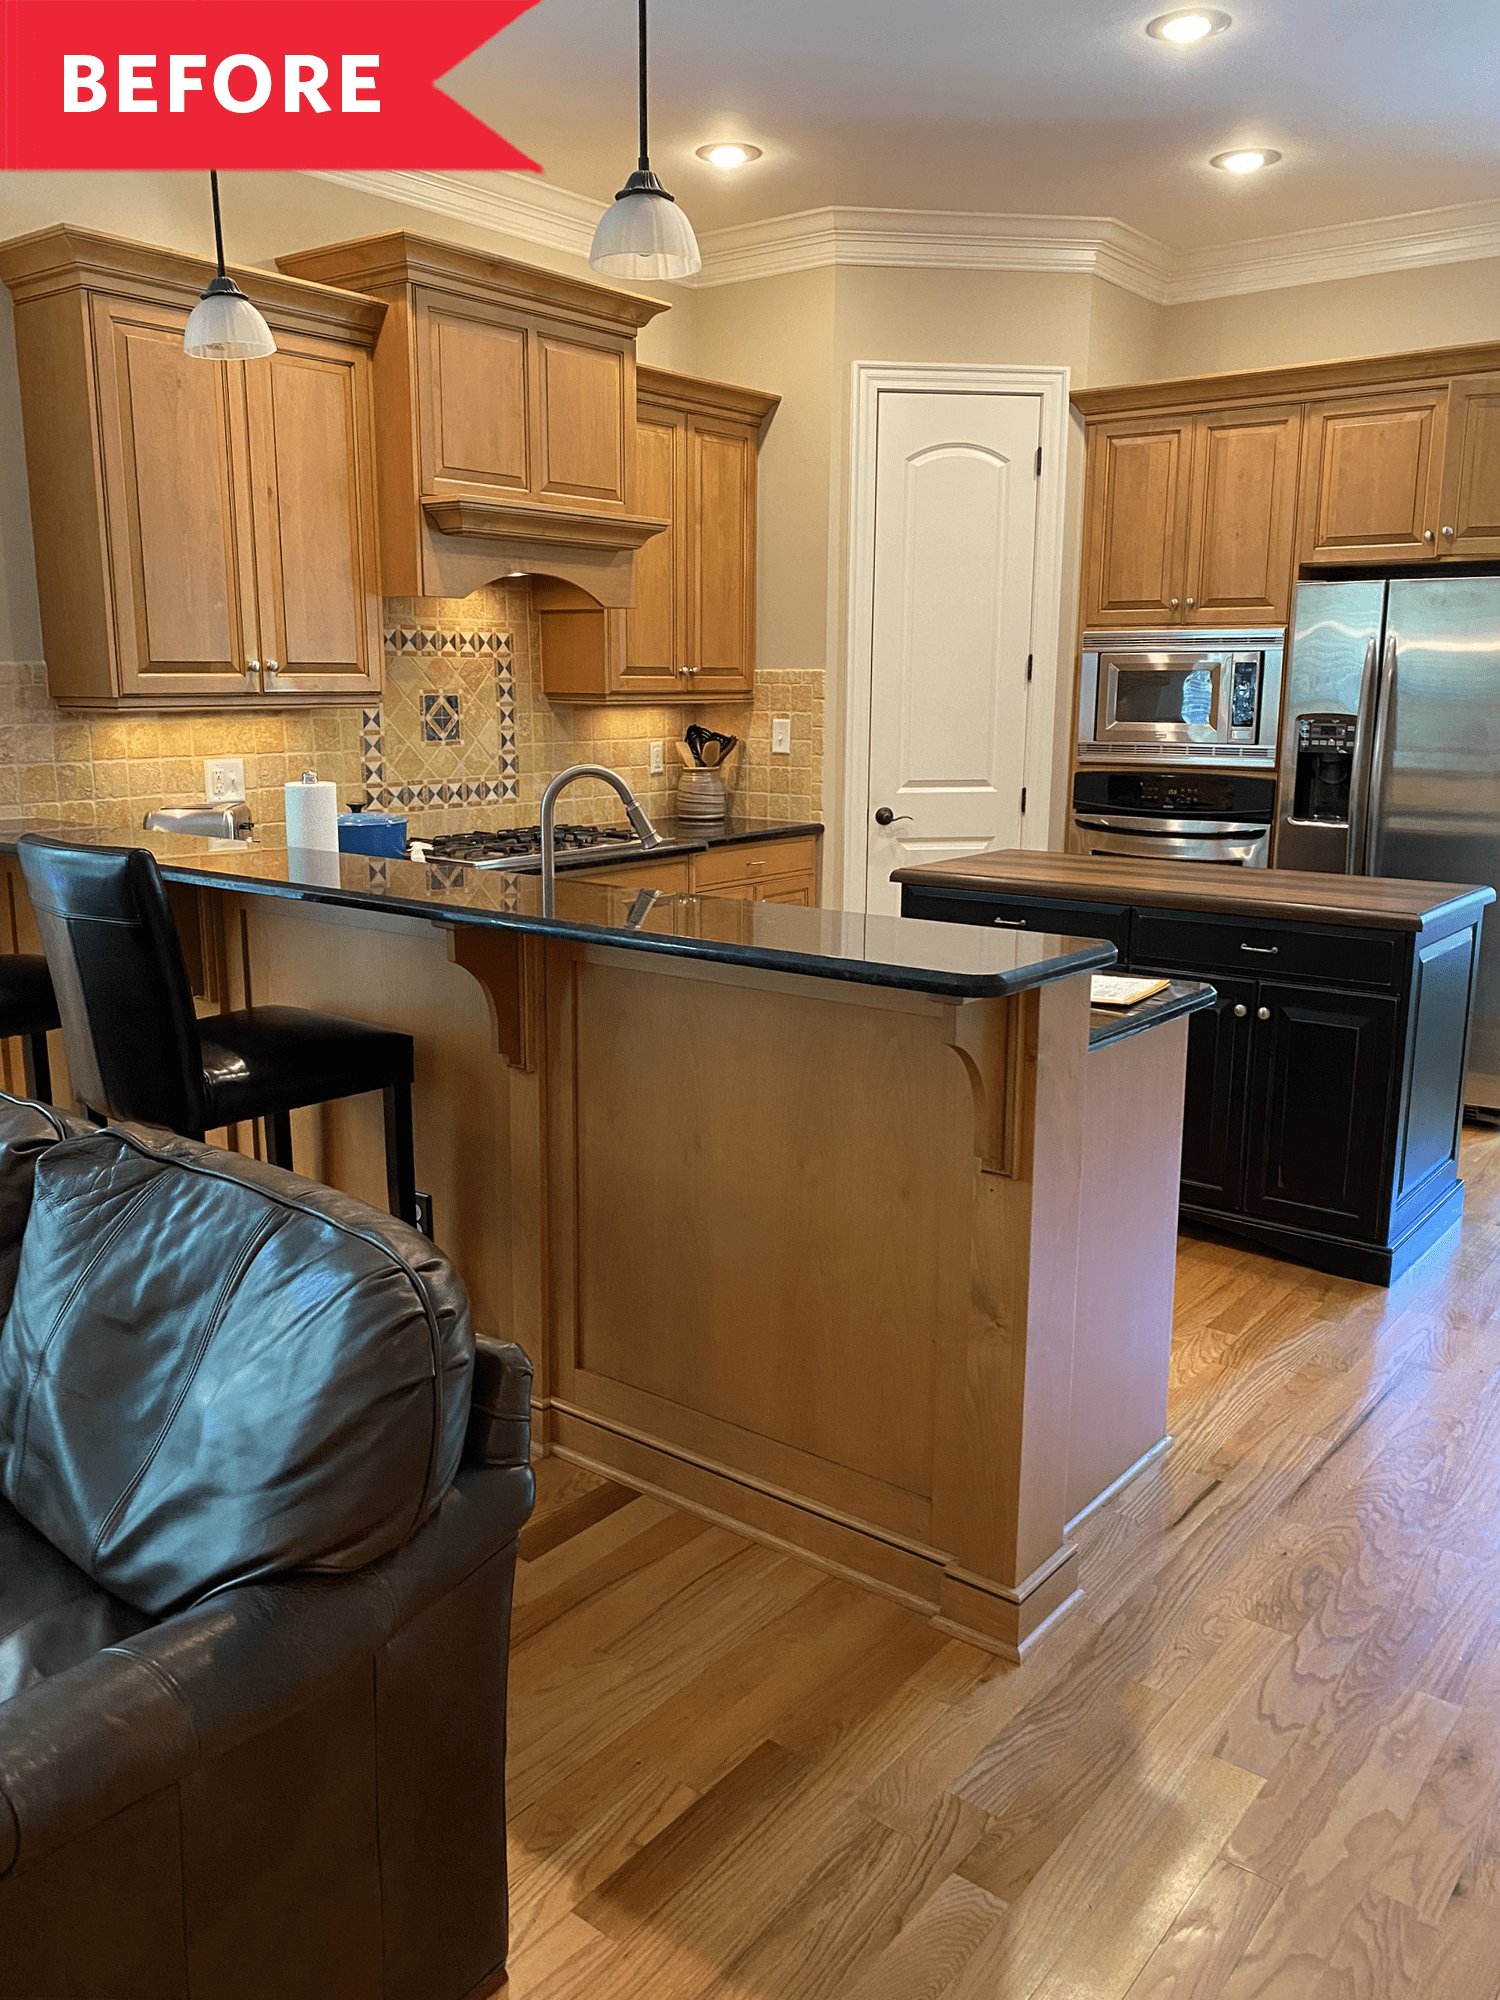 kitchen cabinets with wood floors and wood